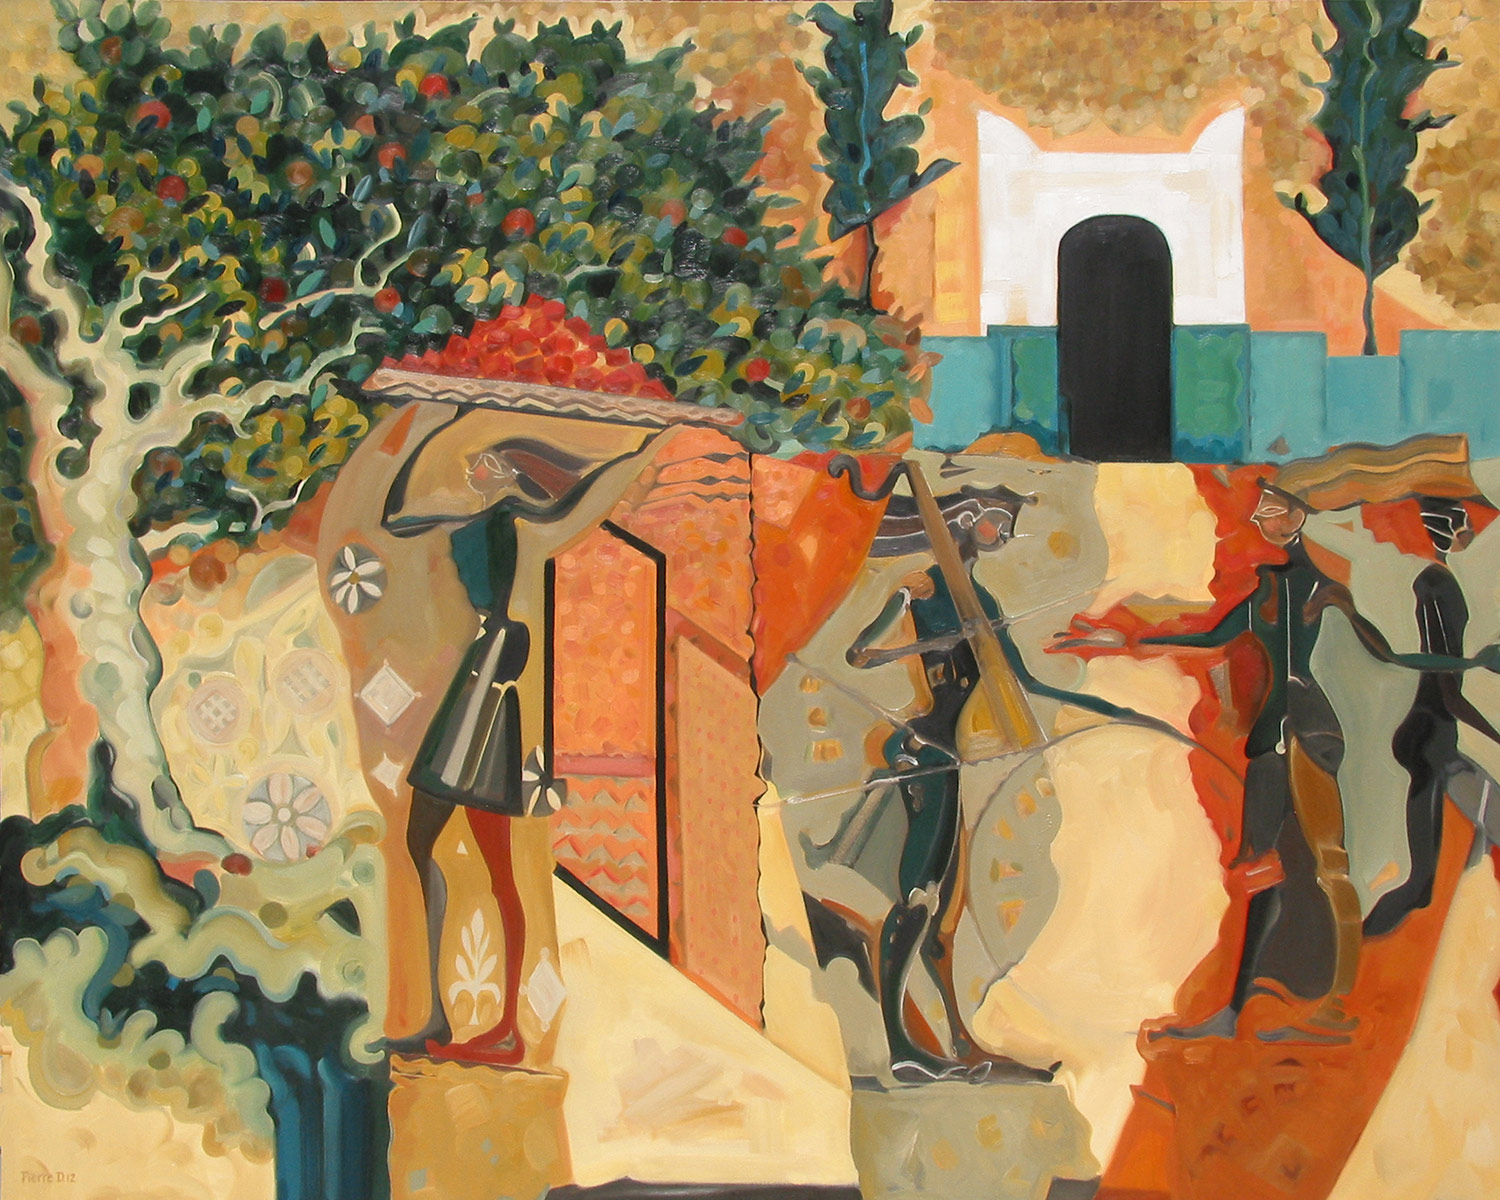  Amphora Dreams I The Pomegranate Tree &nbsp; ©  Oil on canvas  120 cm high x 150 cm wide  Amphora Dreams l, ll, and lll is a triptych - the images are connected by the walls of a Persian garden, and connected in theme by three trees.  The figures ha